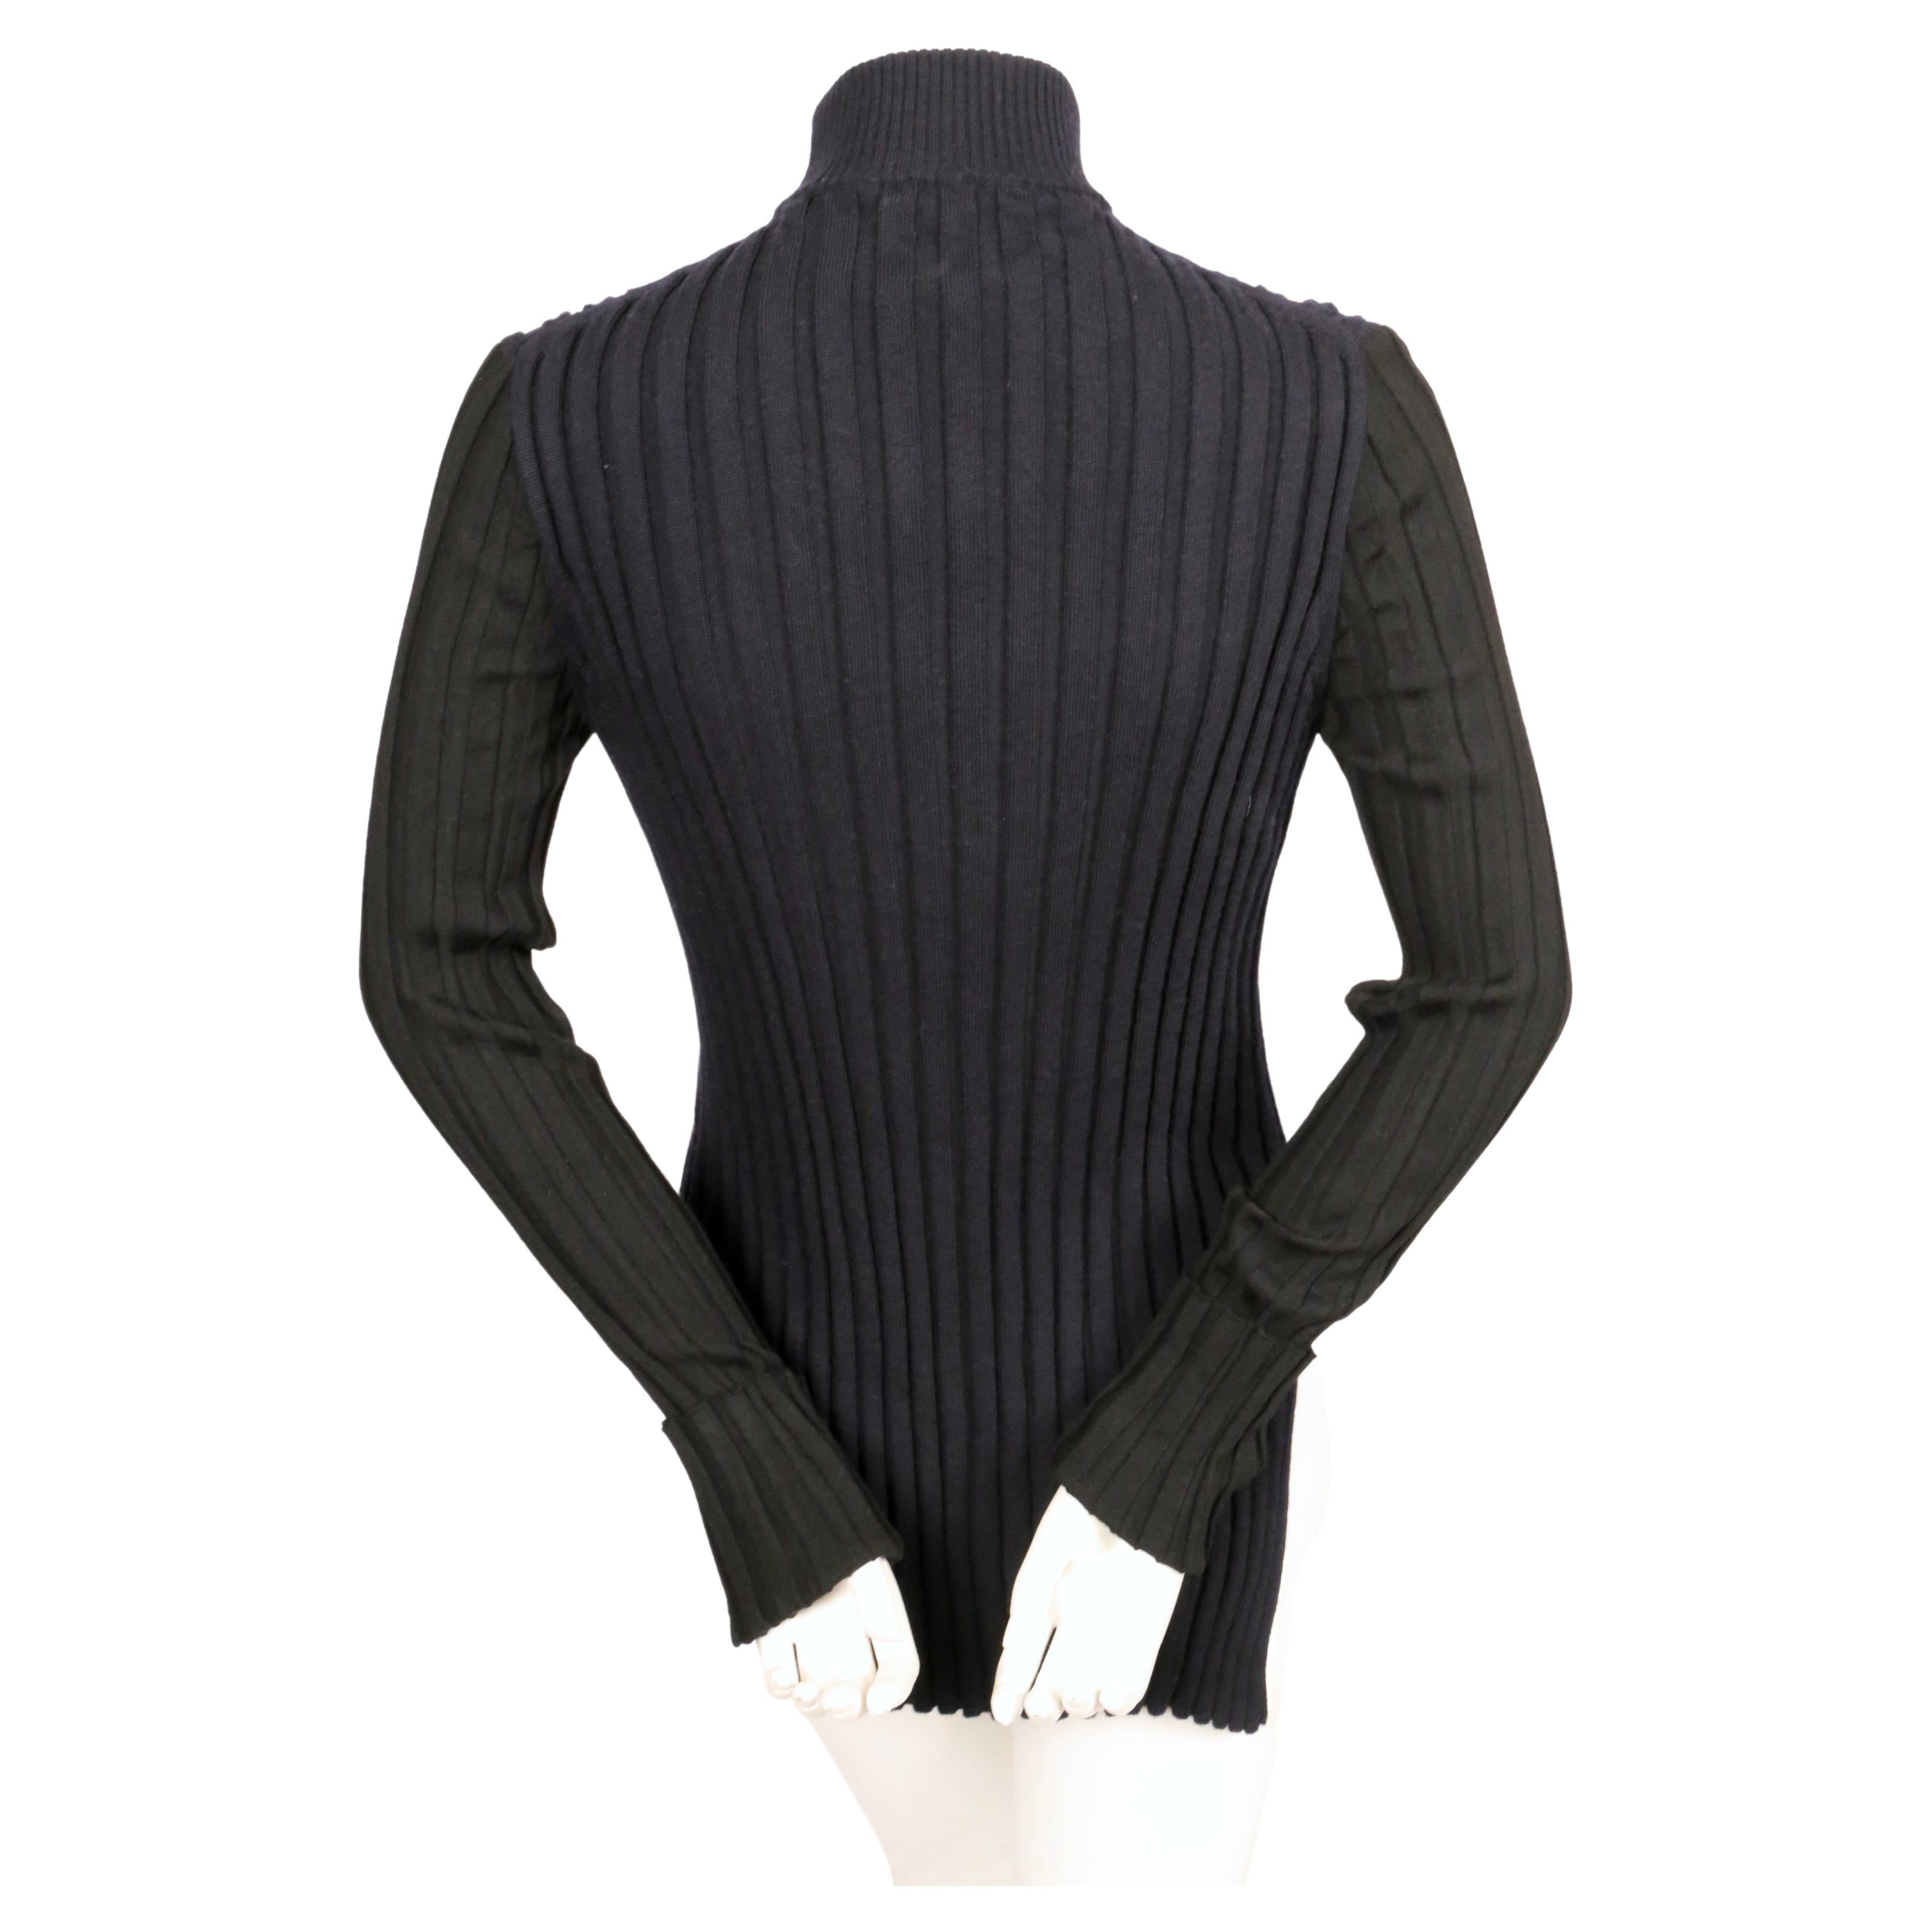 2015 CELINE by PHOEBE PHILO navy & black ribbed sweater tunic with patch pockets For Sale 2